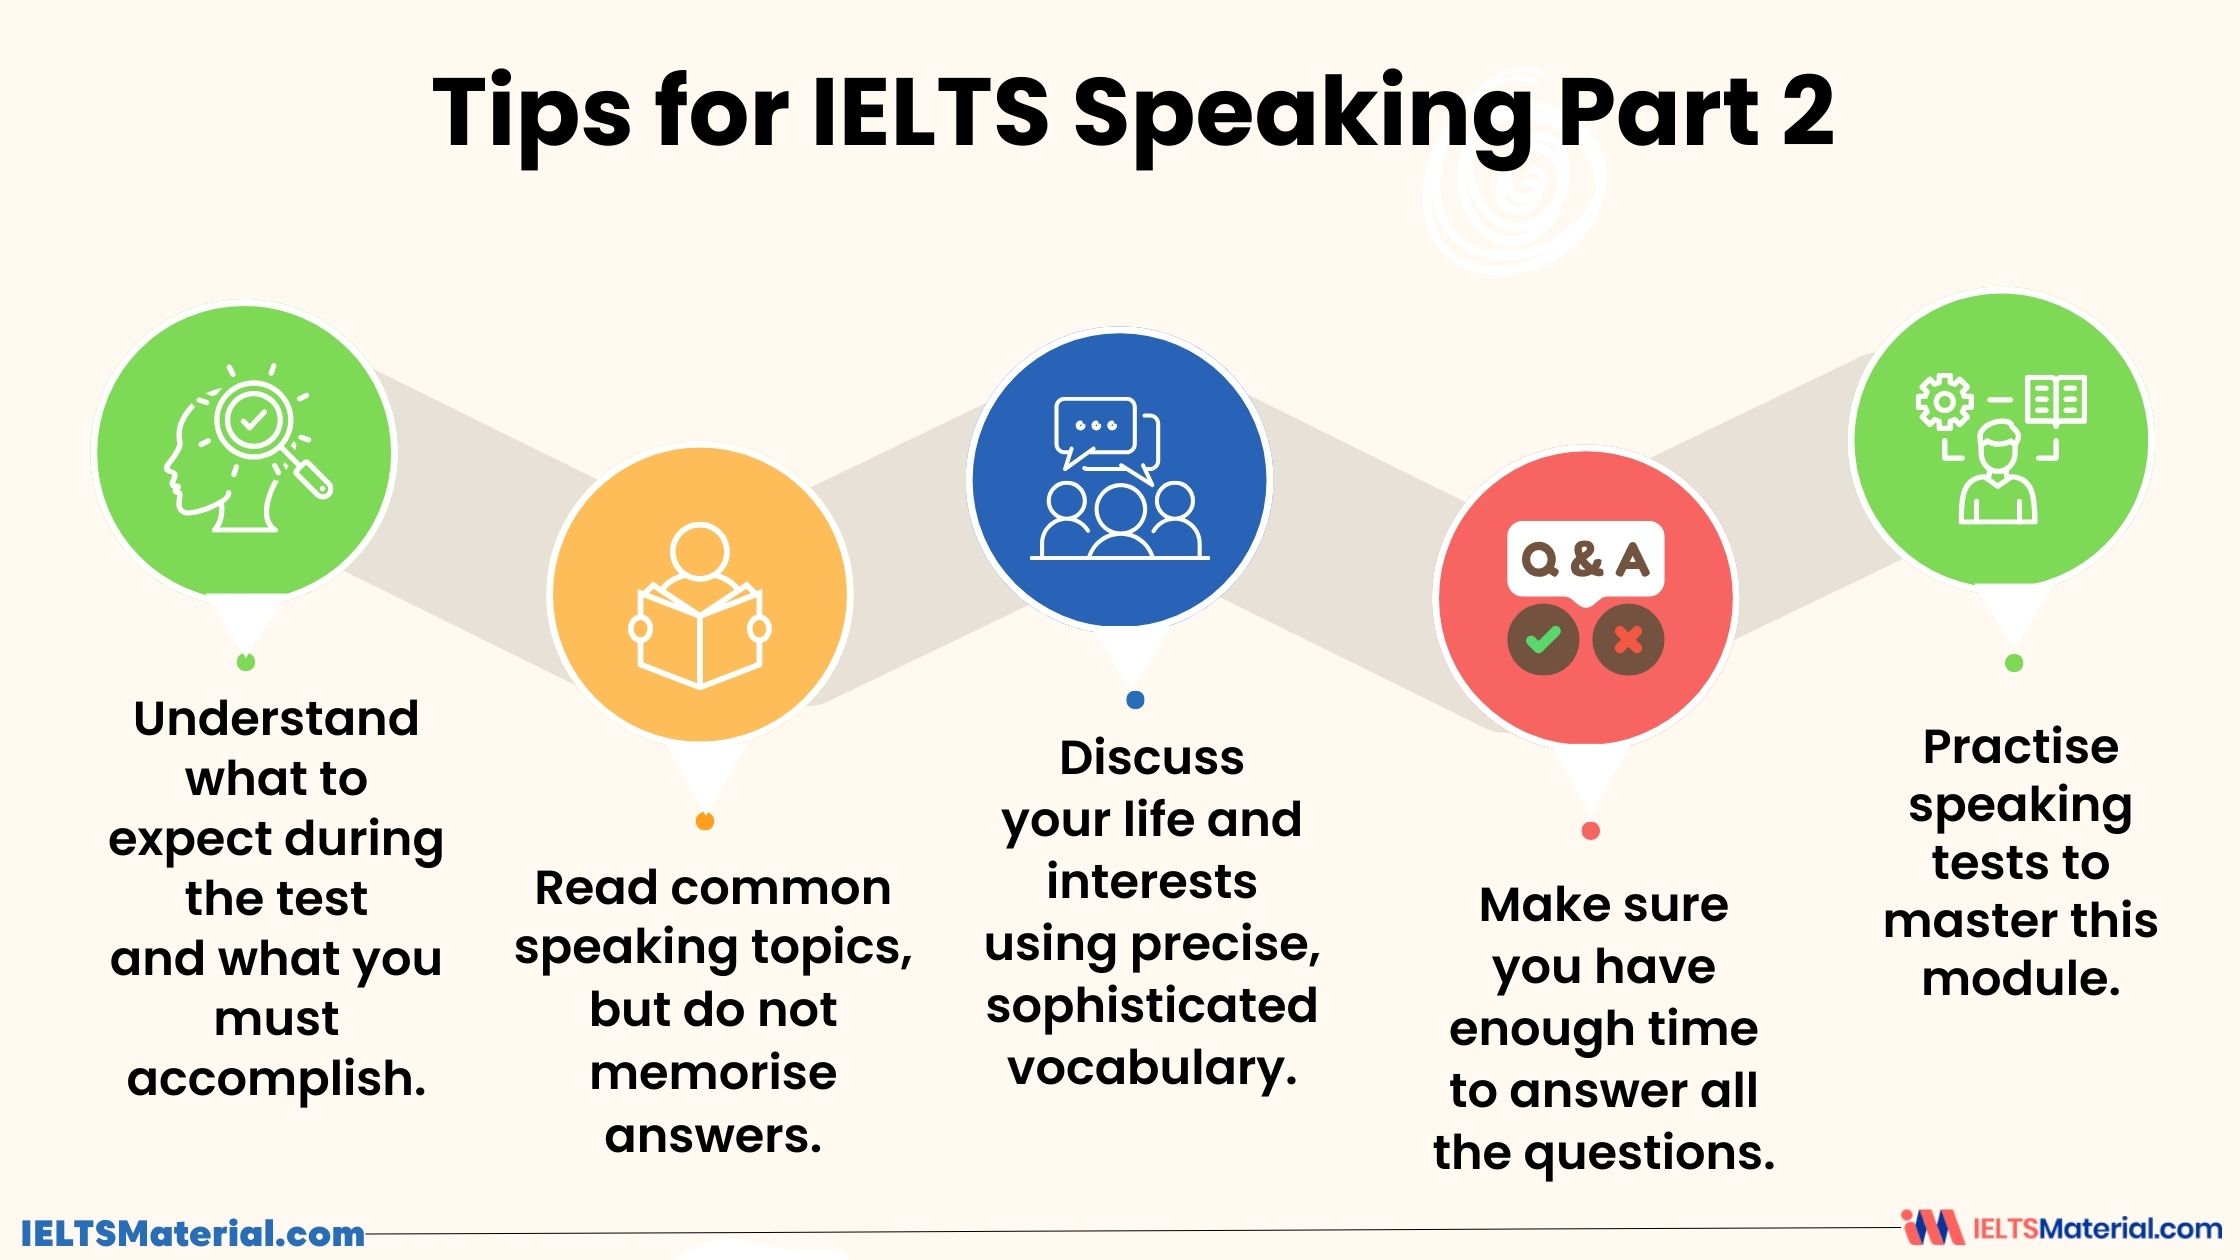 IELTS Speaking test tips and tricks